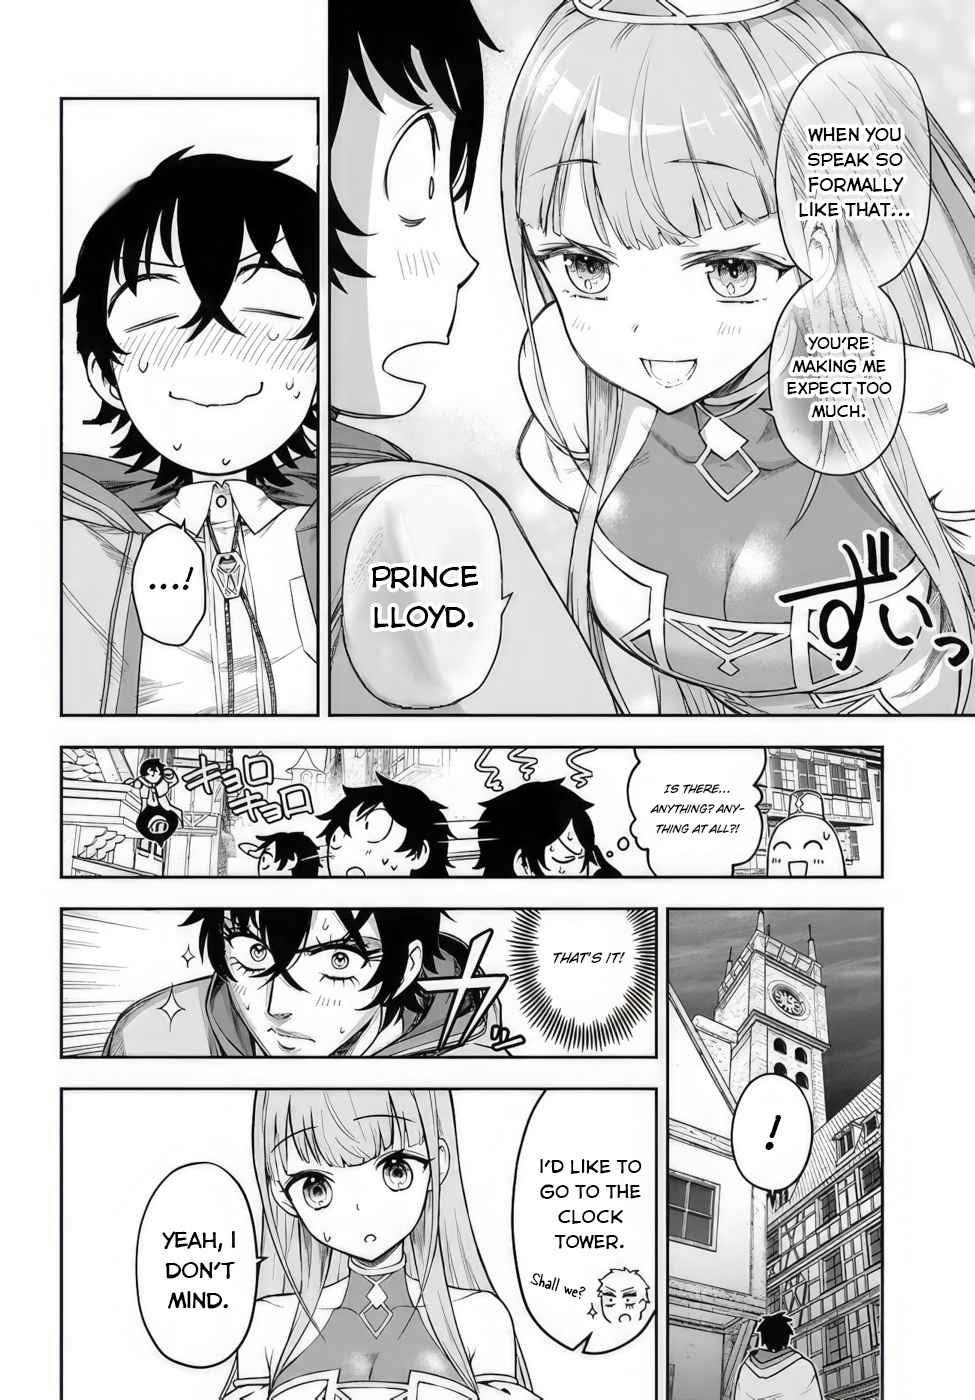 the post b4 this is panels from another manga by the same author fun fact .  📖 魔法少女にあこがれて / Mahou Shoujo ni Akogarete / Gushing over…